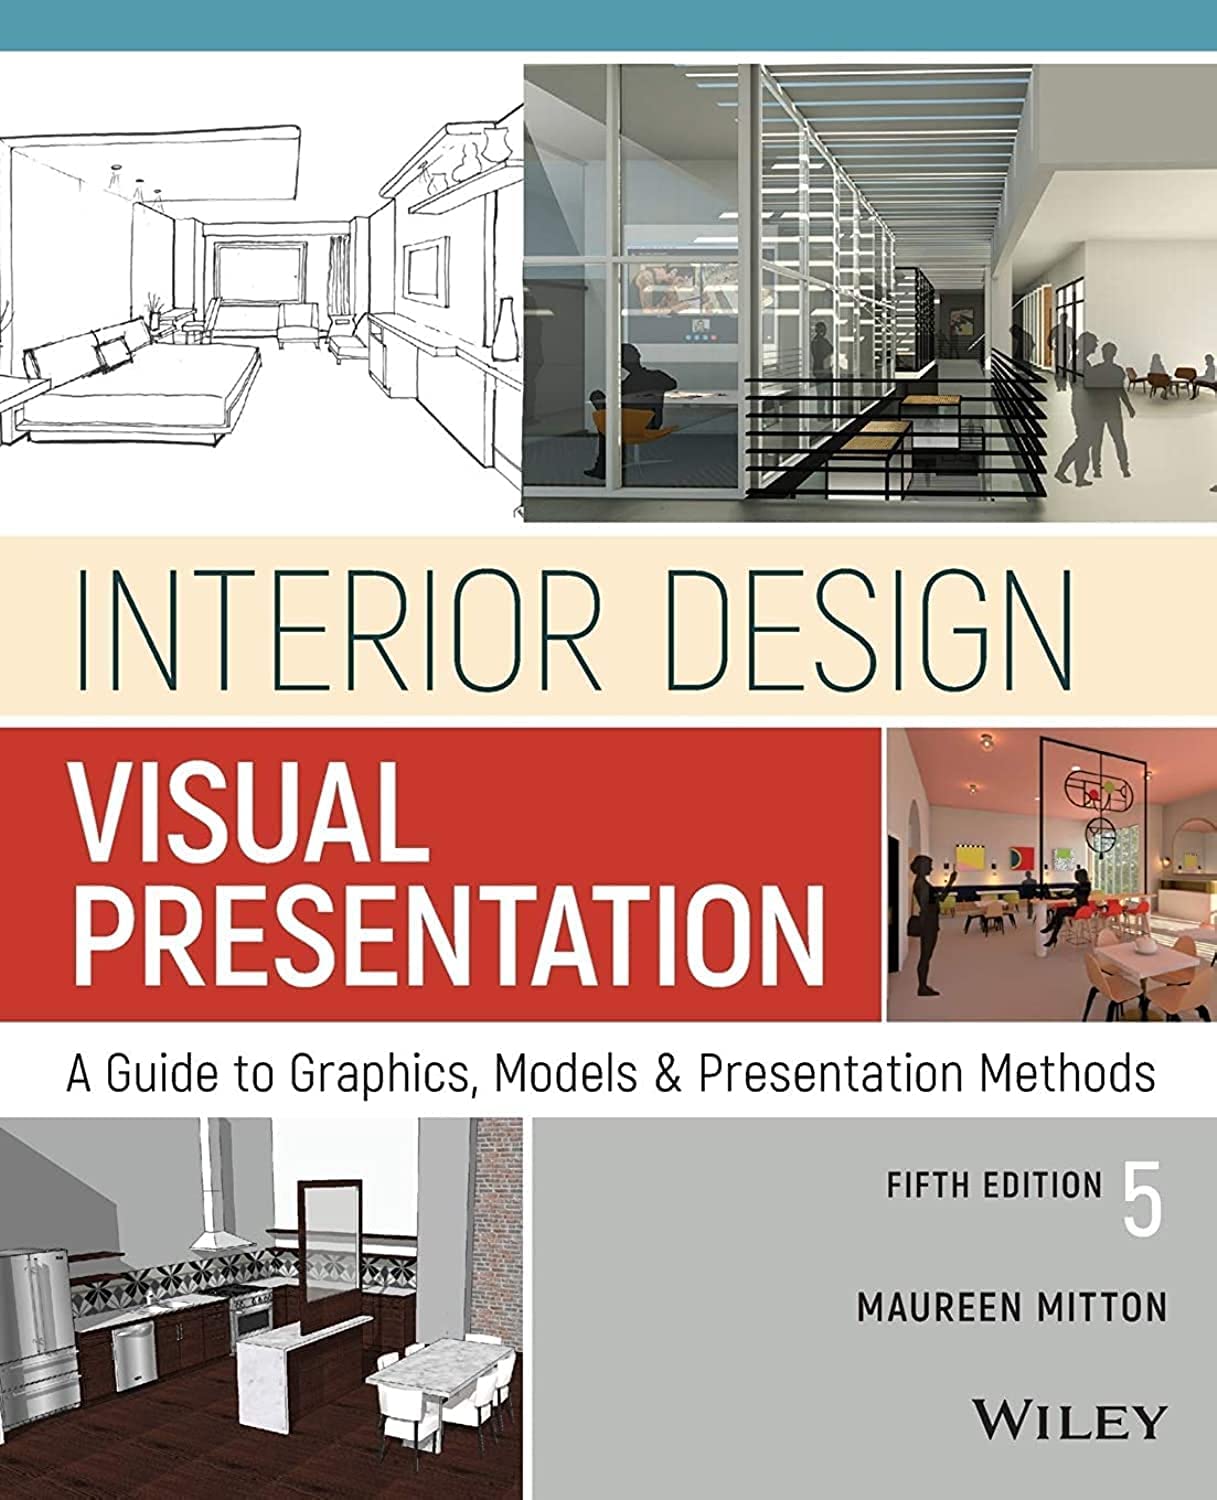 (EBook PDF)Interior Design Visual Presentation: A Guide to Graphics, Models and Presentation Methods, 5th Edition by Maureen Mitton